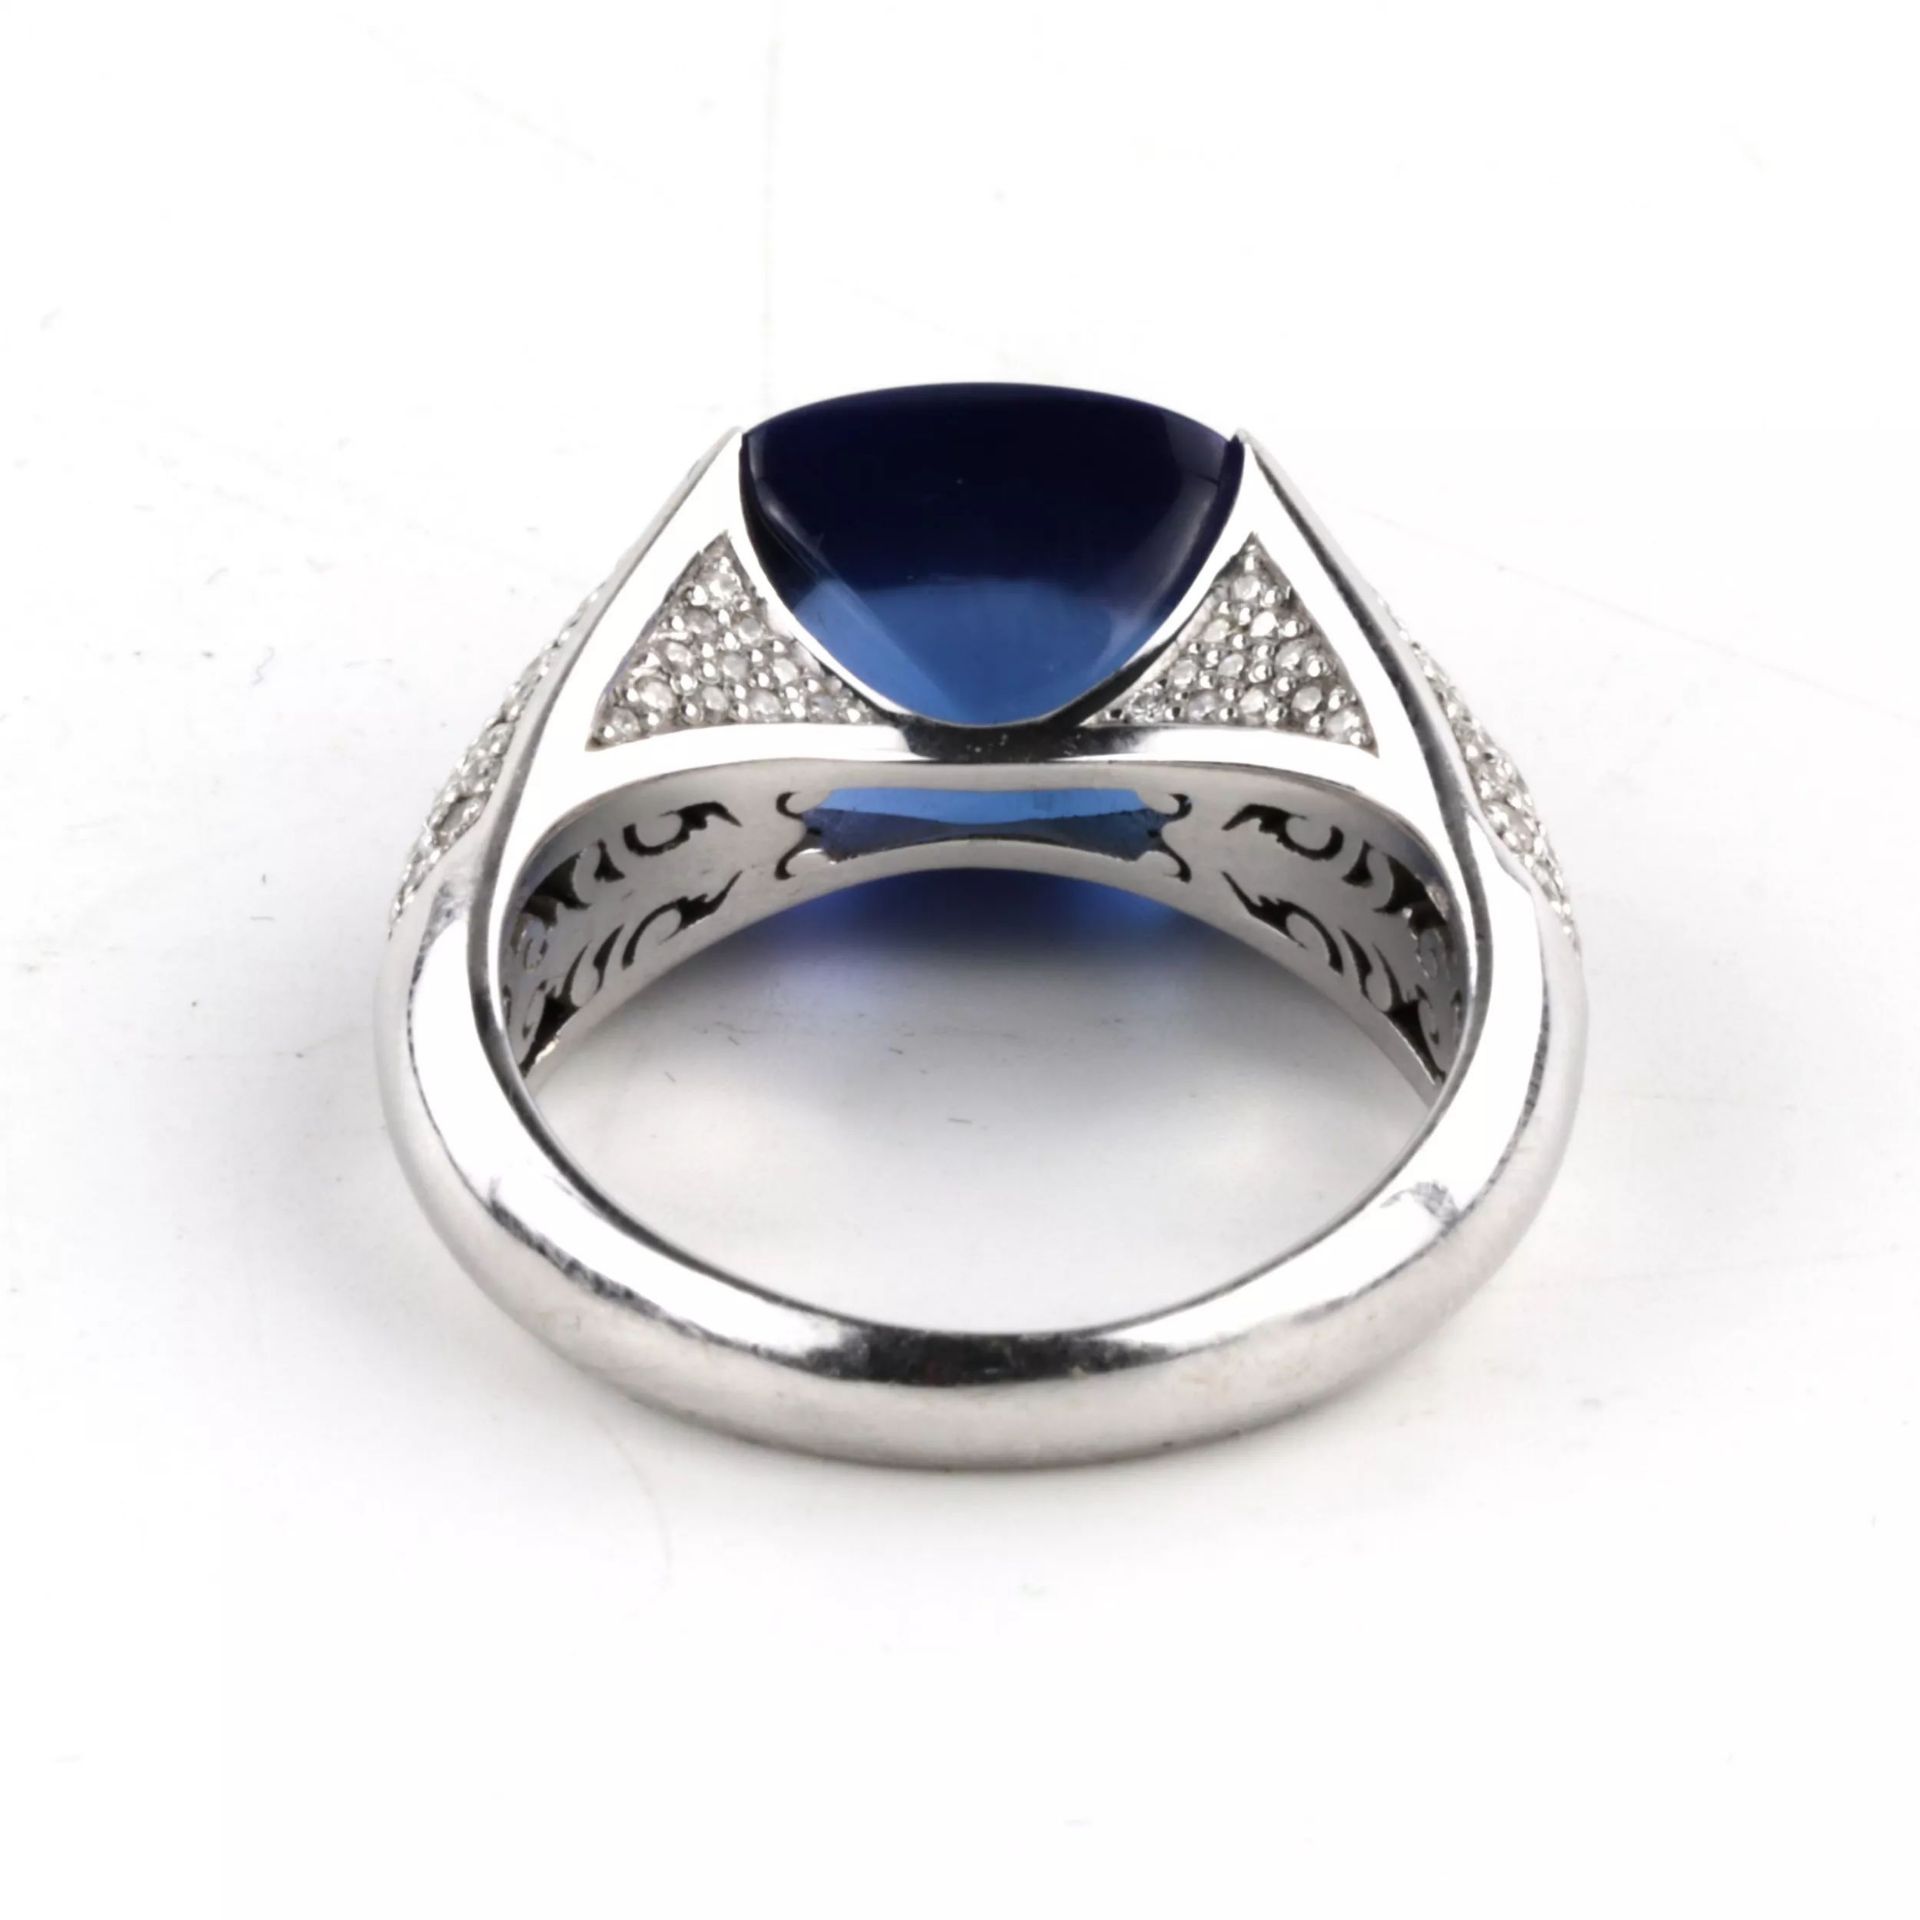 18K white gold ring with diamonds and tanzanite. - Image 7 of 9